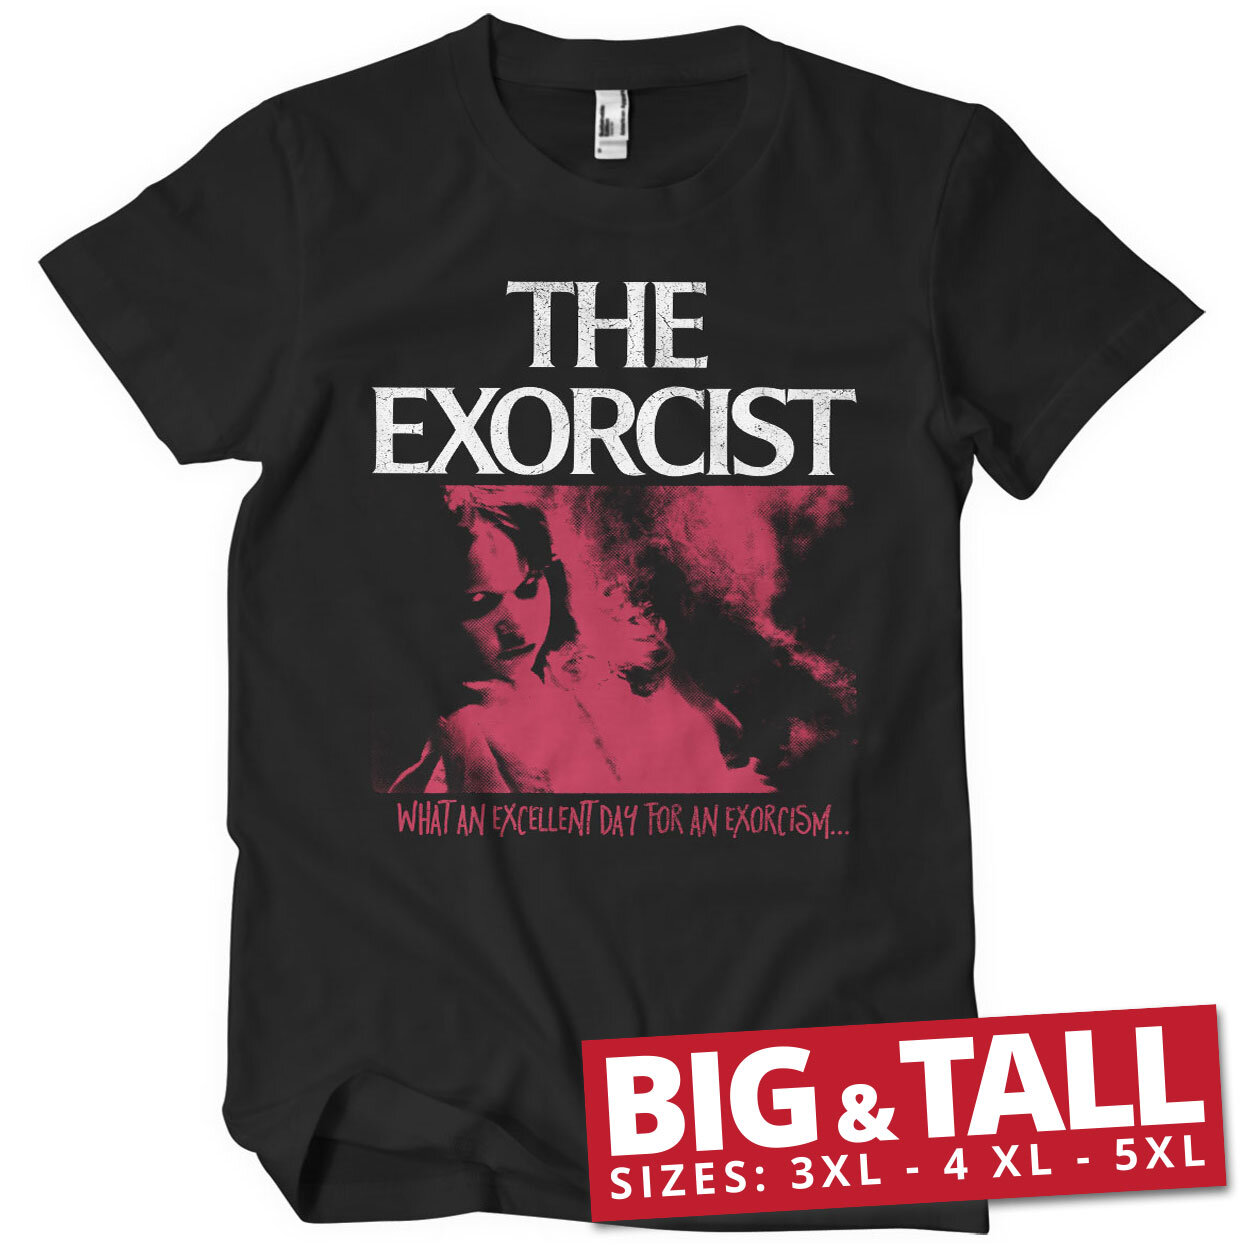 The Exorcist - Excellent Day Big & Tall T-Shirt